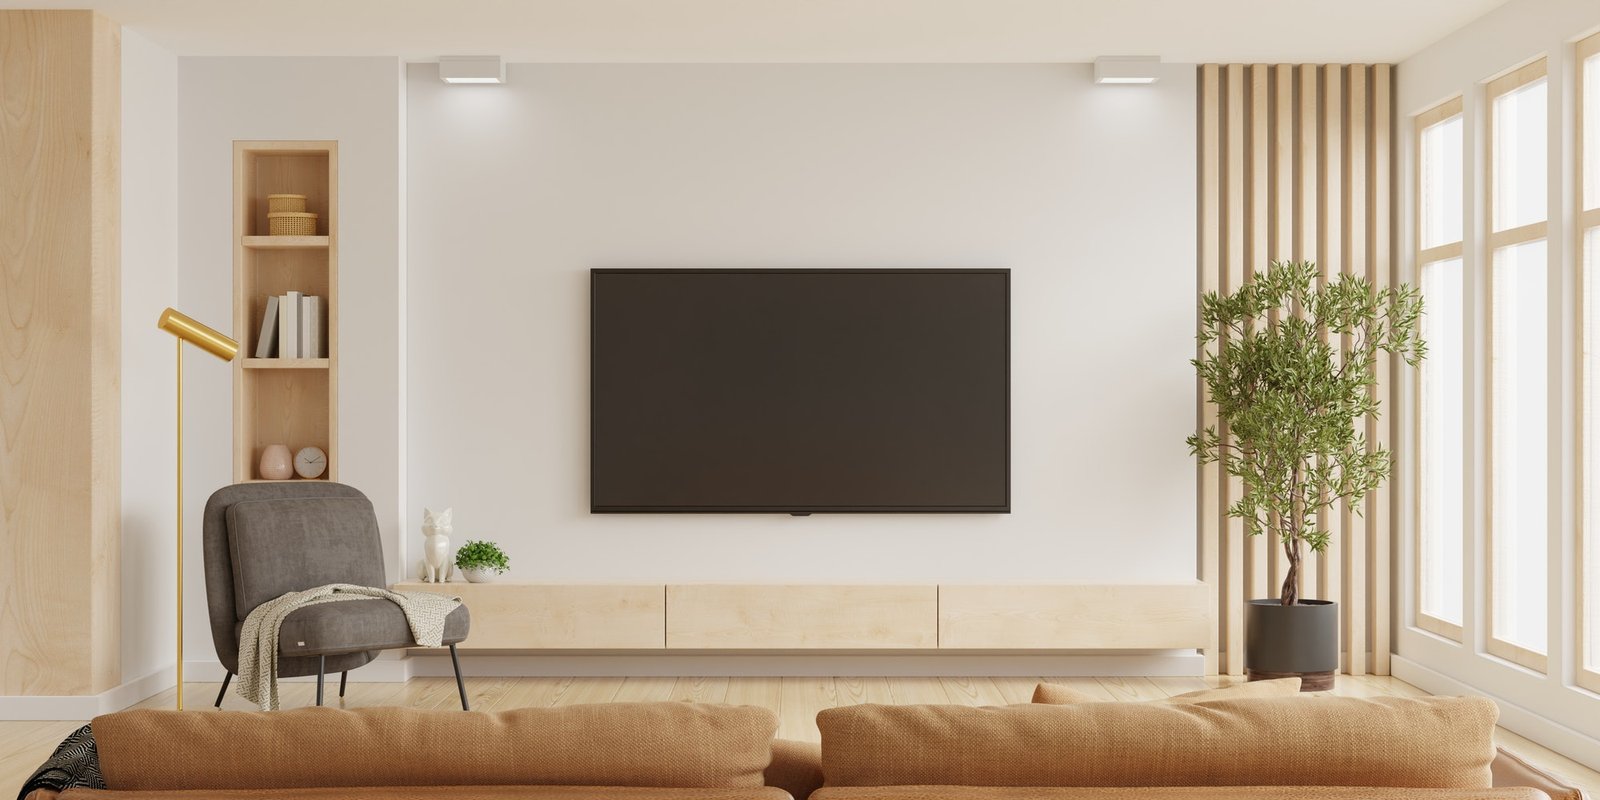 White wall mounted tv on cabinet in living room.